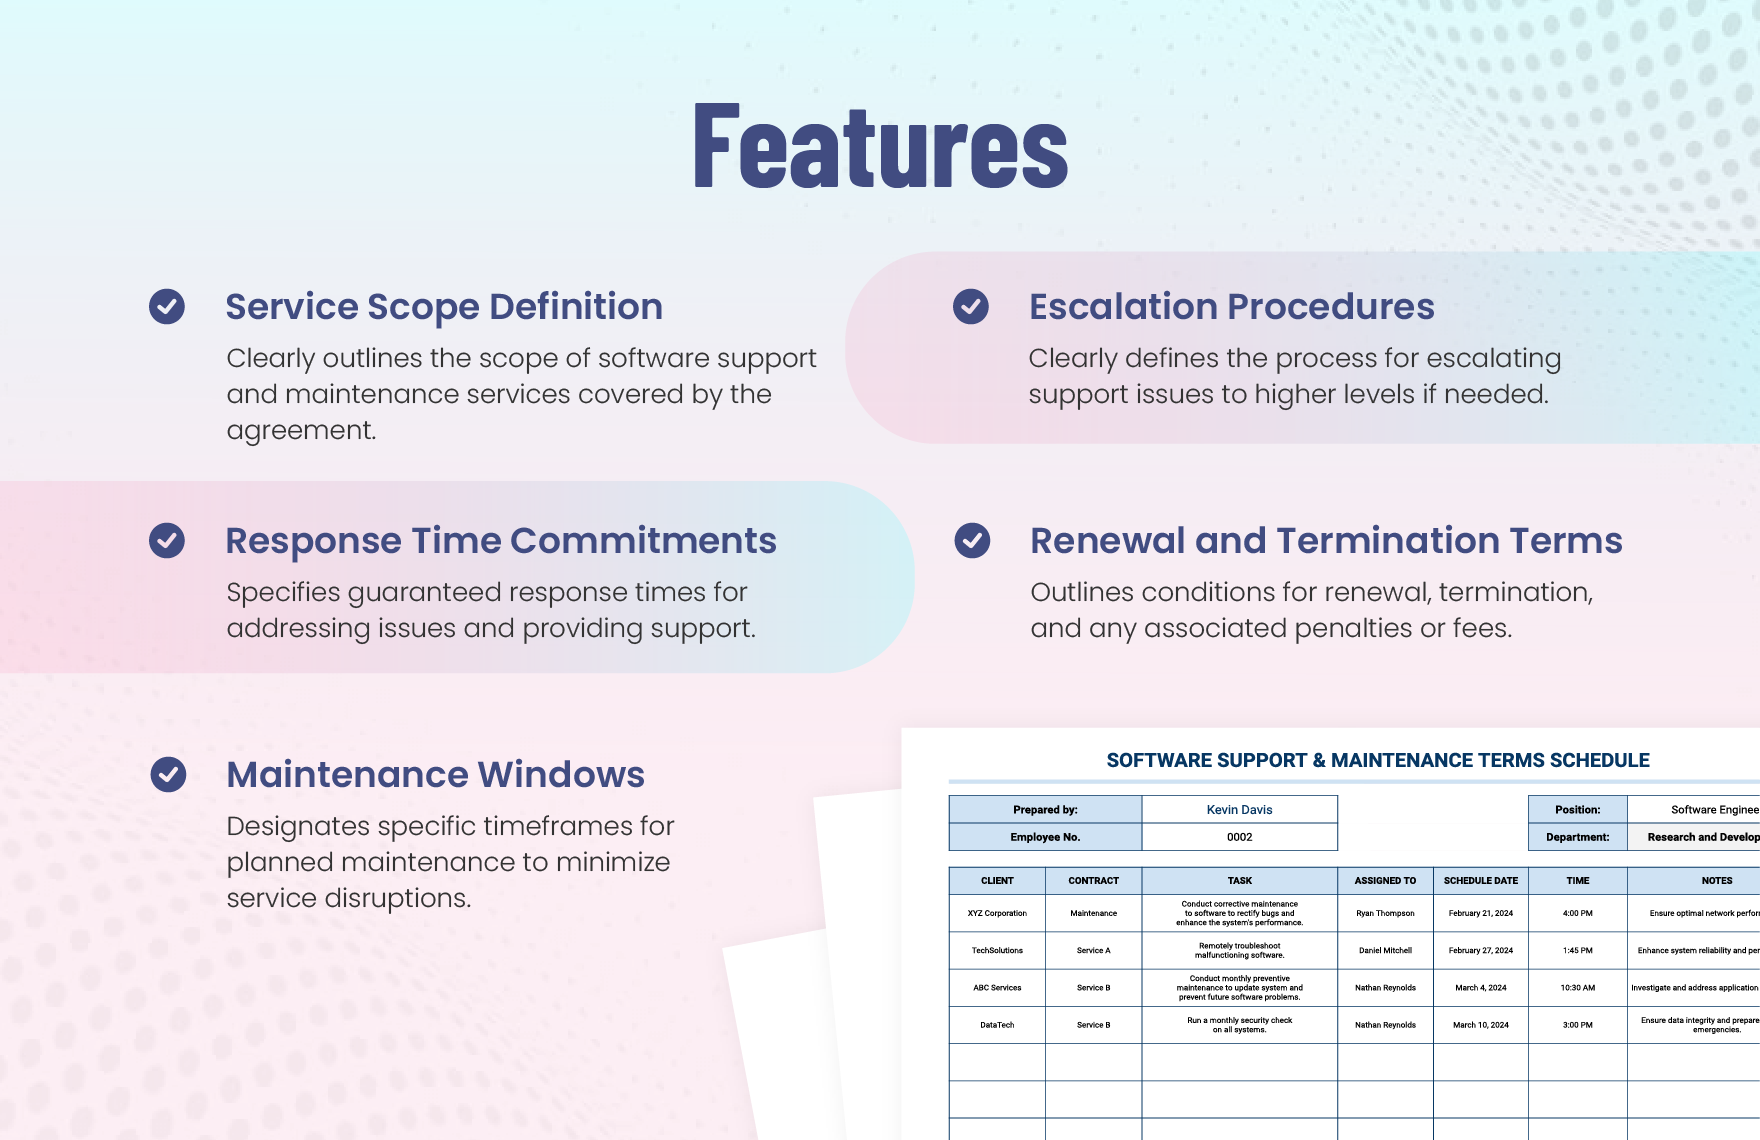 Software Support & Maintenance Terms Schedule Template